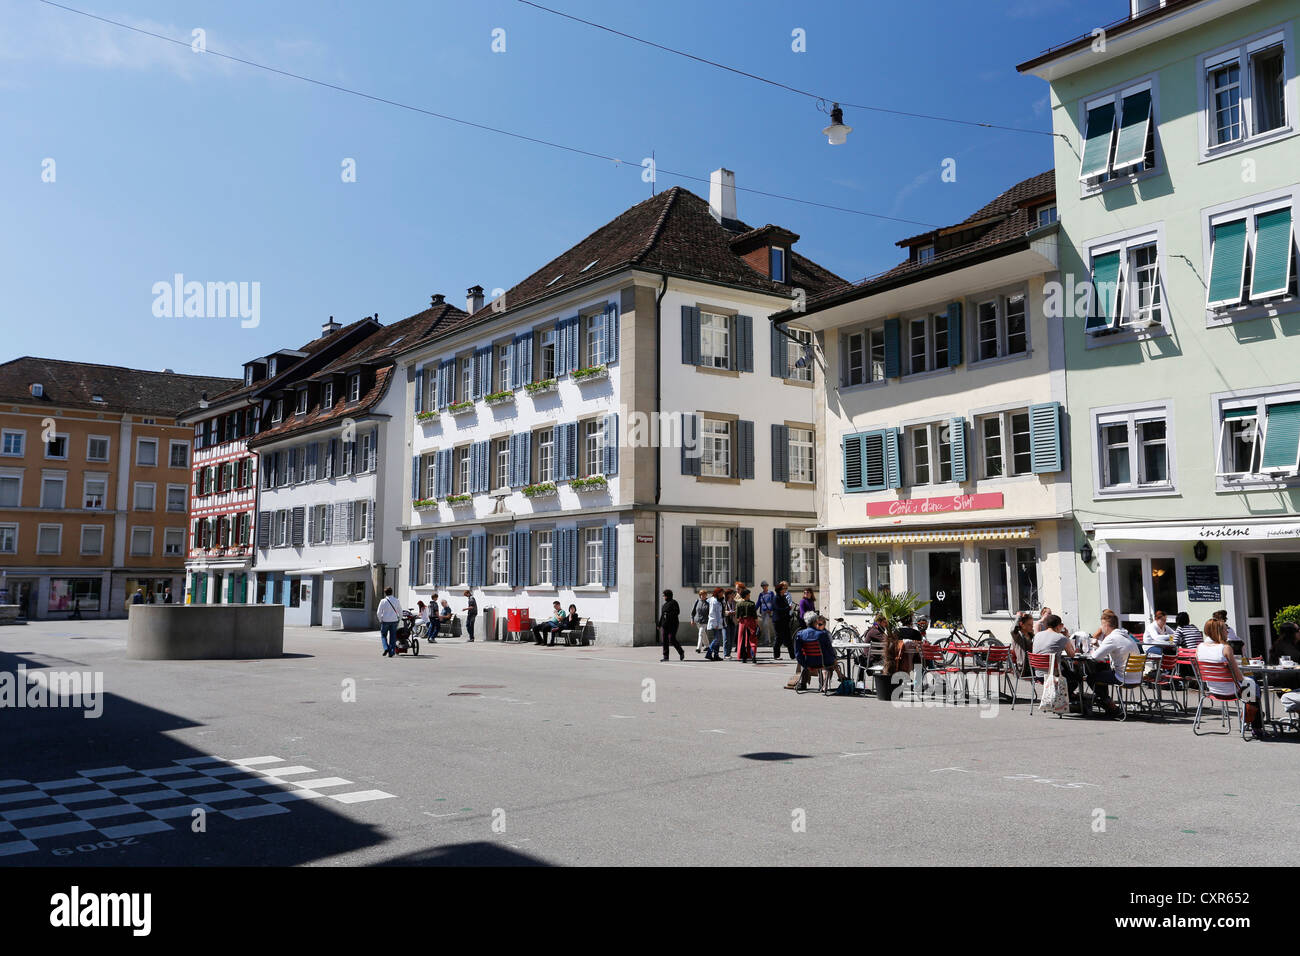 Old town of Steinberggasse street, town centre of Winterthur, Switzerland, Europe Stock Photo